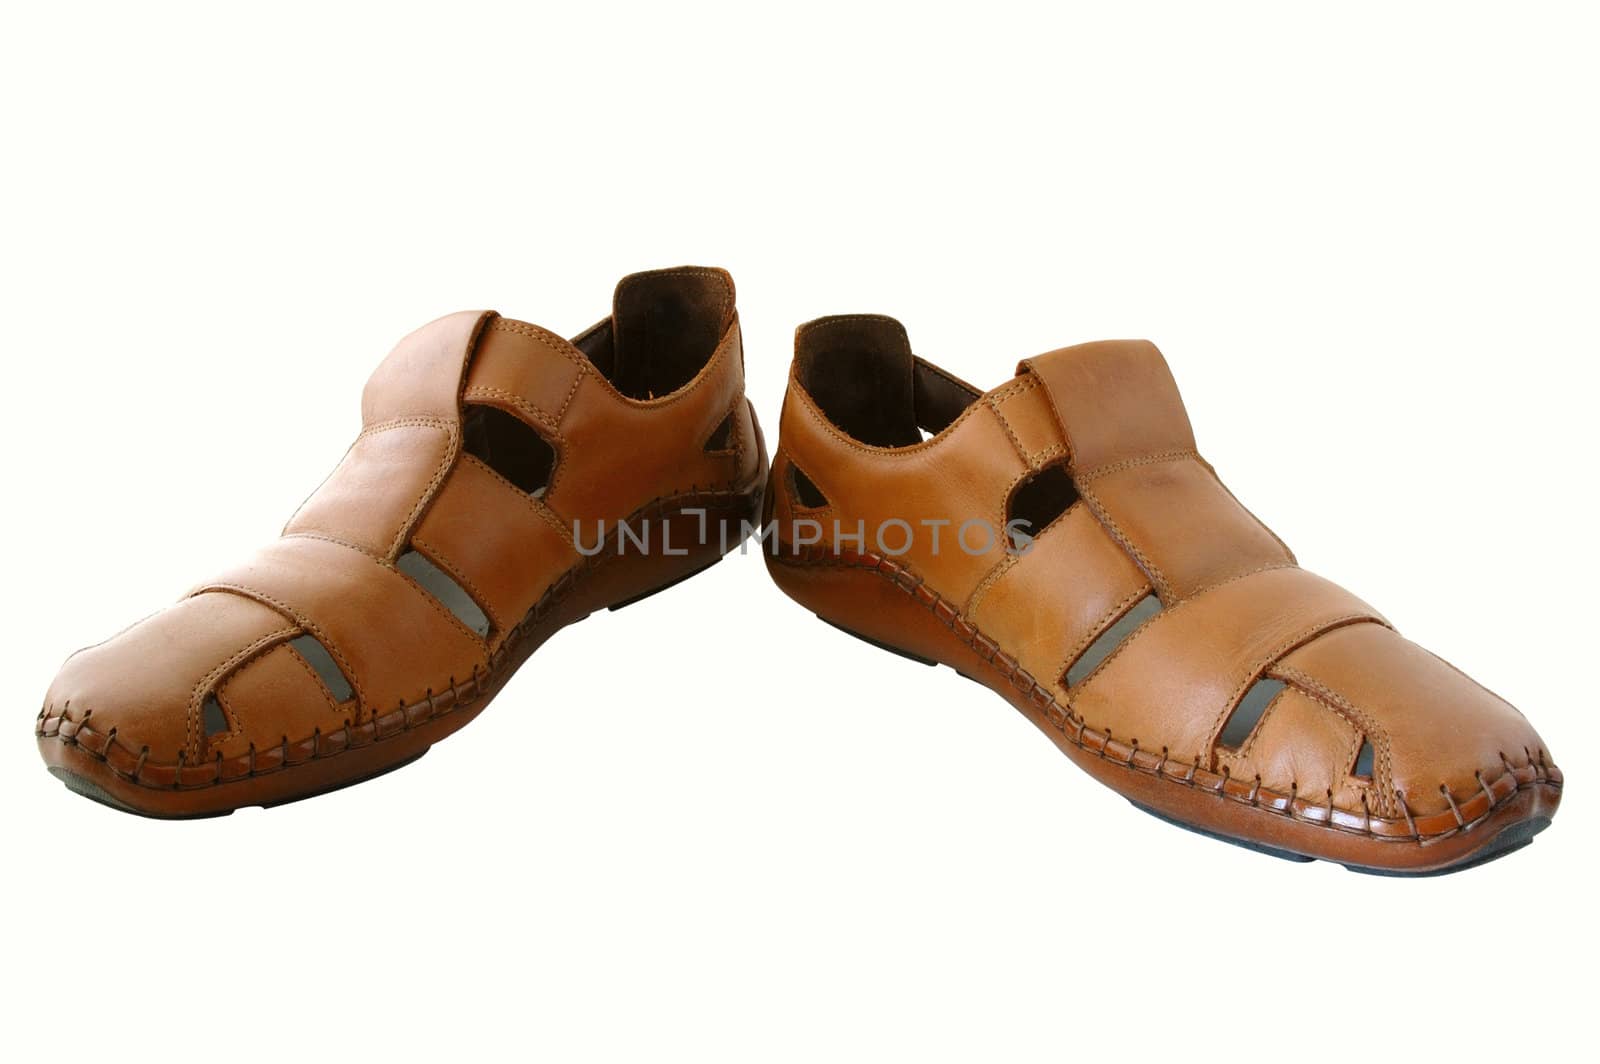 Man's summer leather brown shoes (sandals or mocassins).